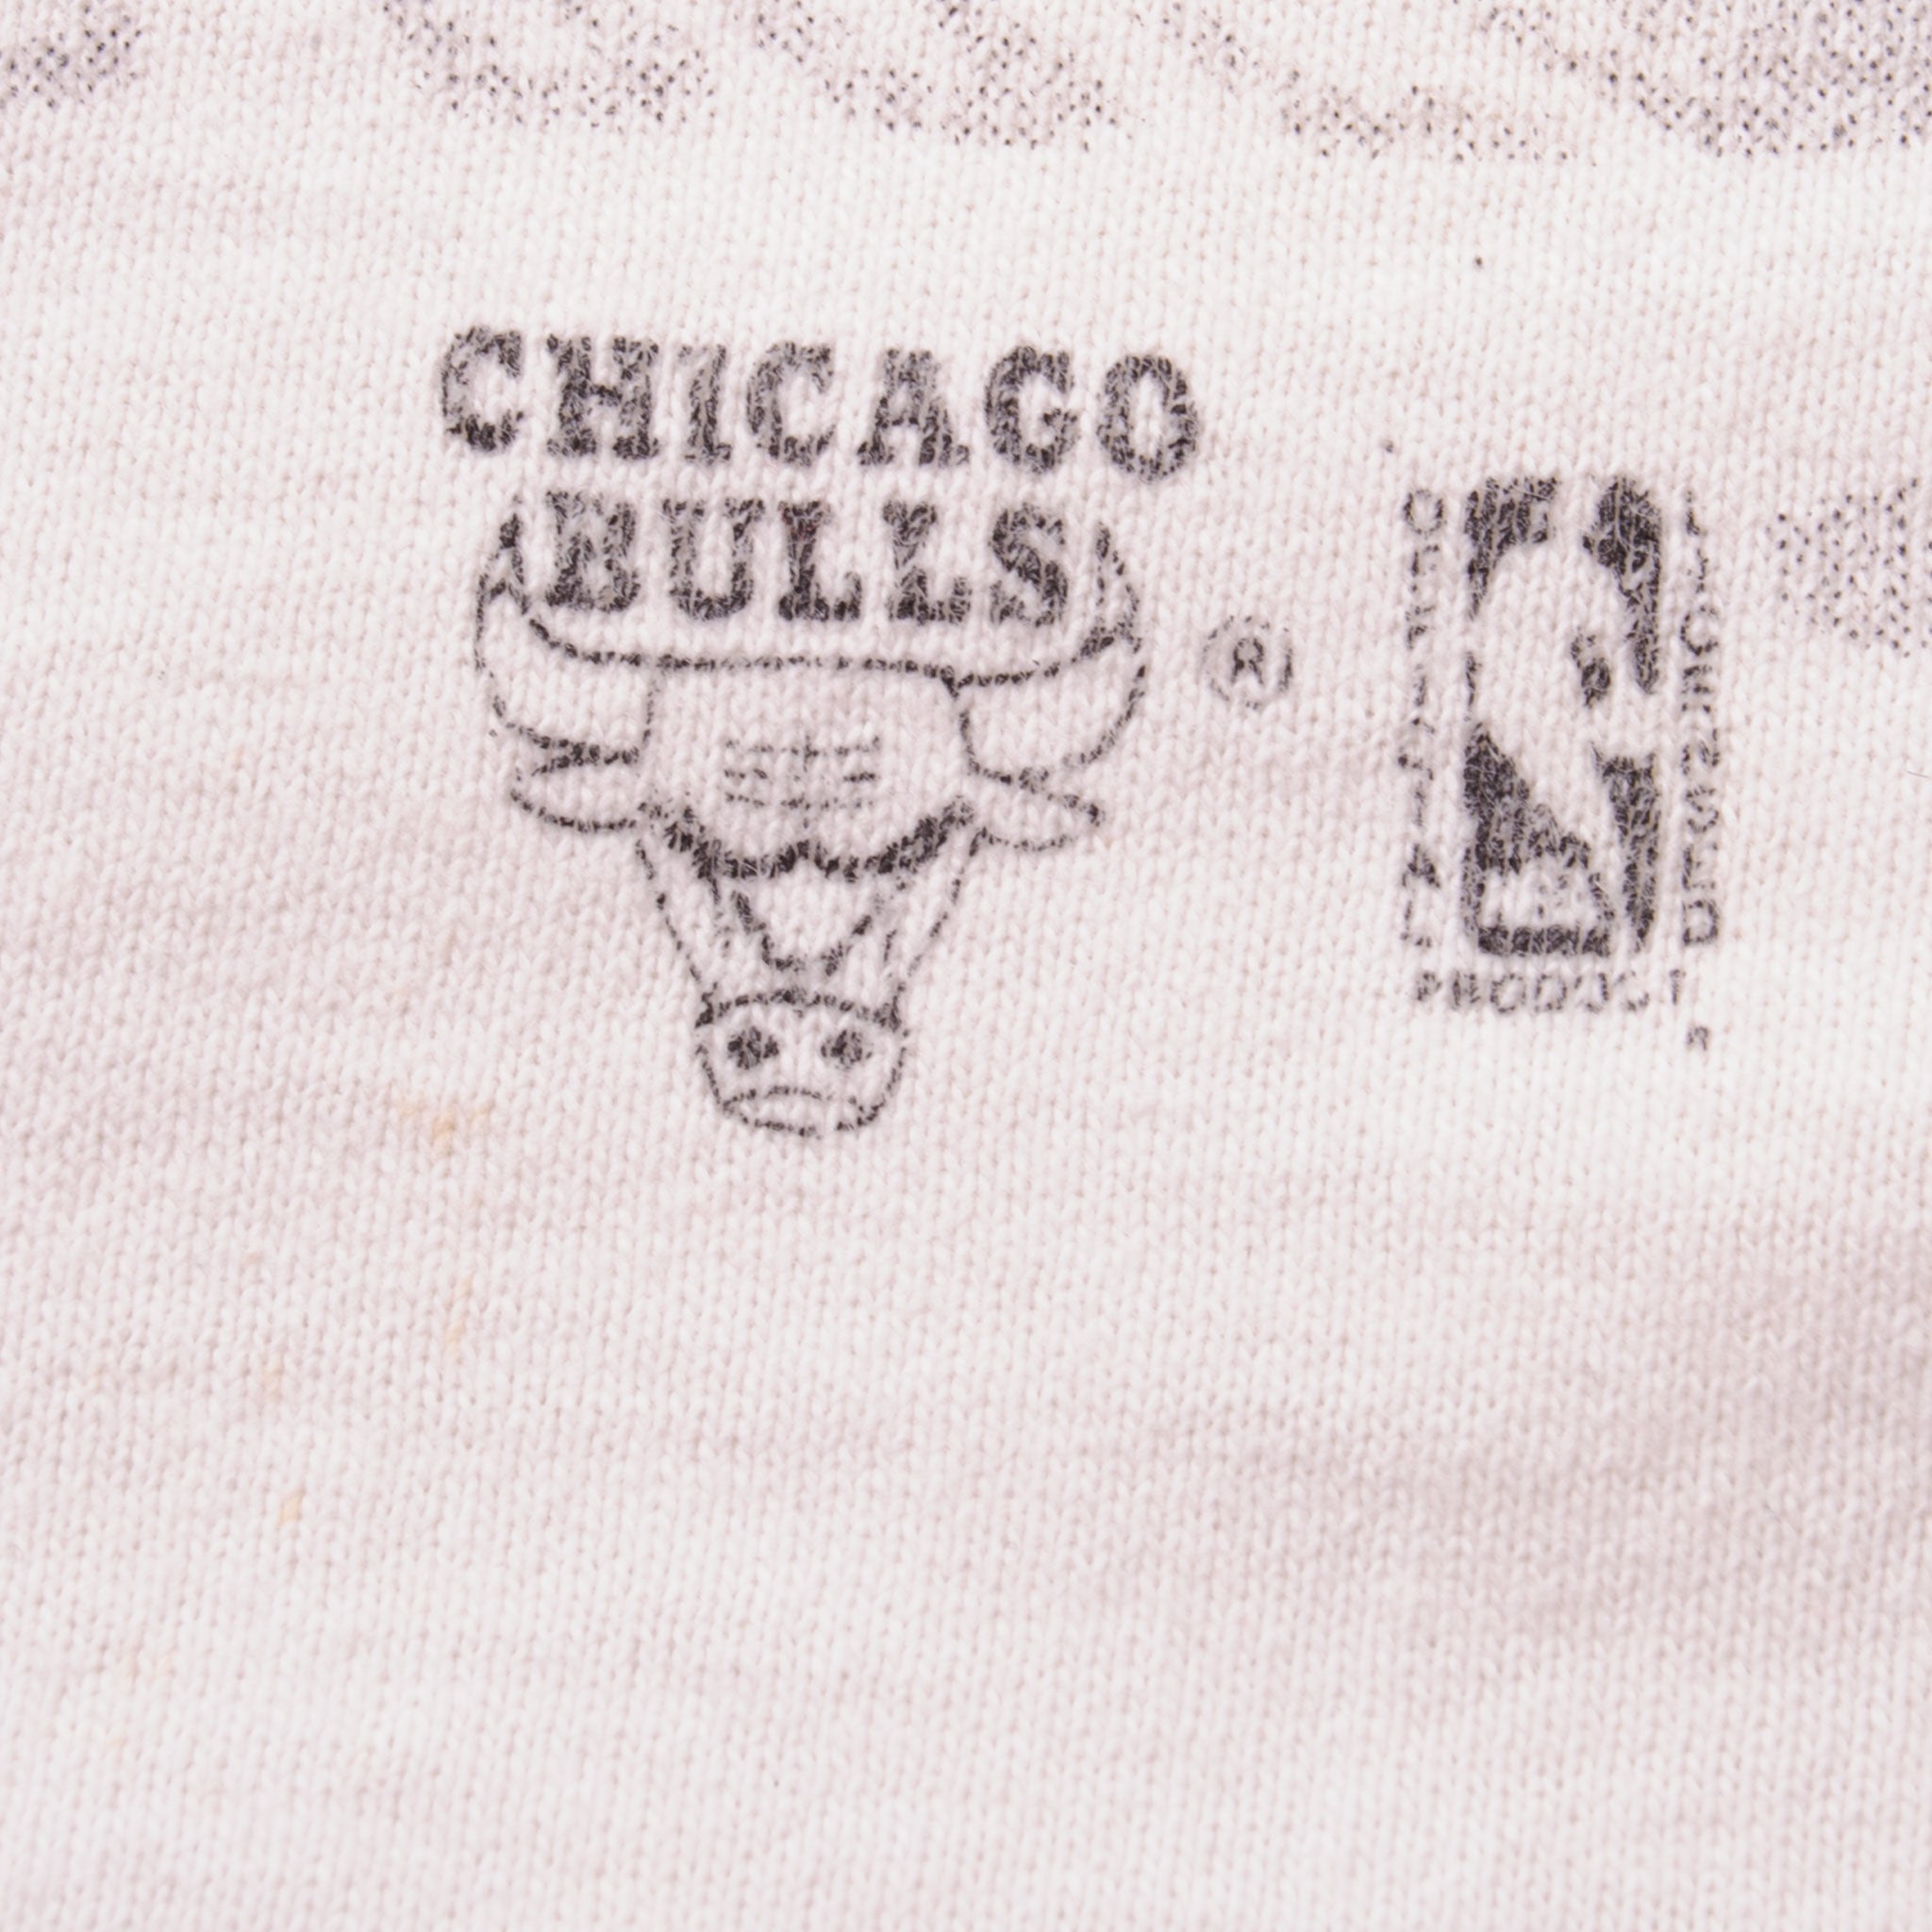 VINTAGE NBA CHICAGO BULLS TEE SHIRT 1990's SIZE XL MADE IN USA